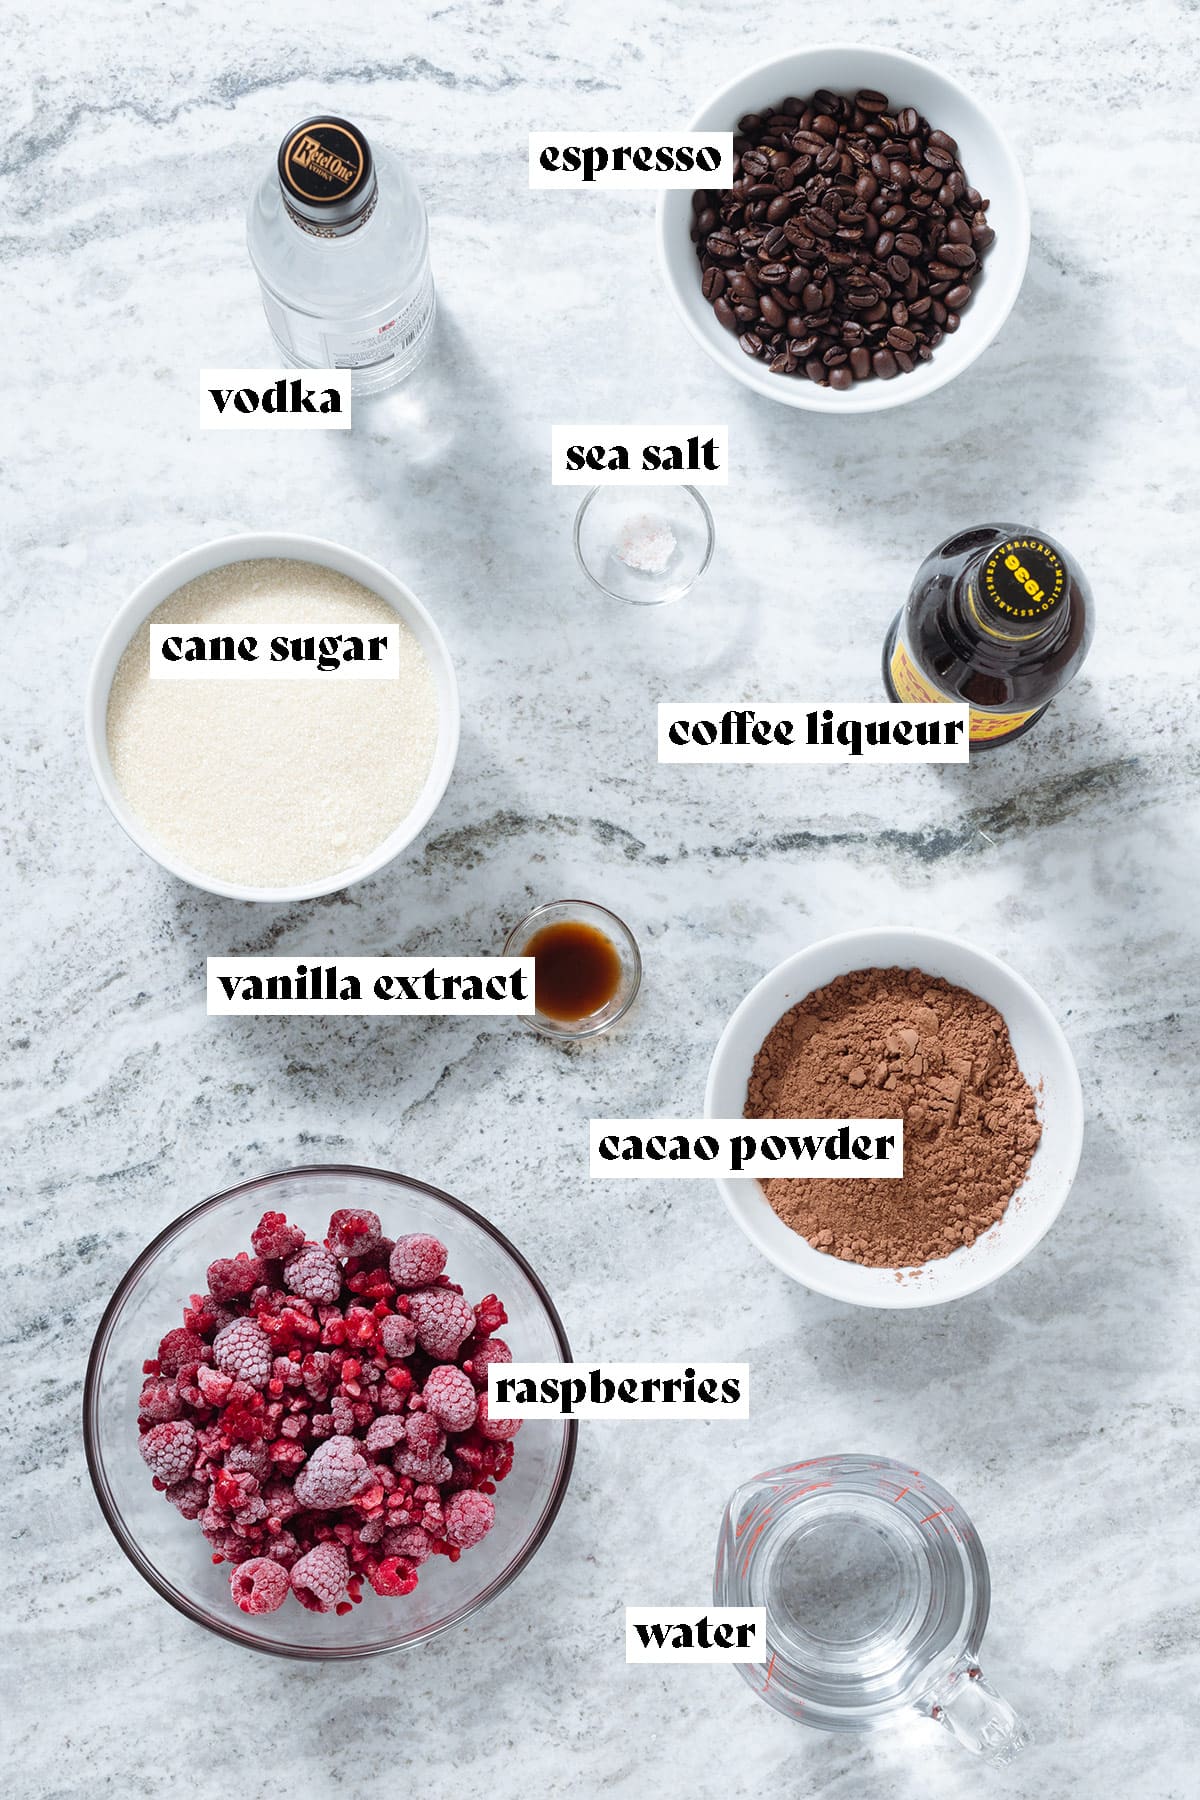 Raspberries, cacao powder, cane sugar, espresso, kahlua, and other ingredients laid out on a grey stone background with text overlay.